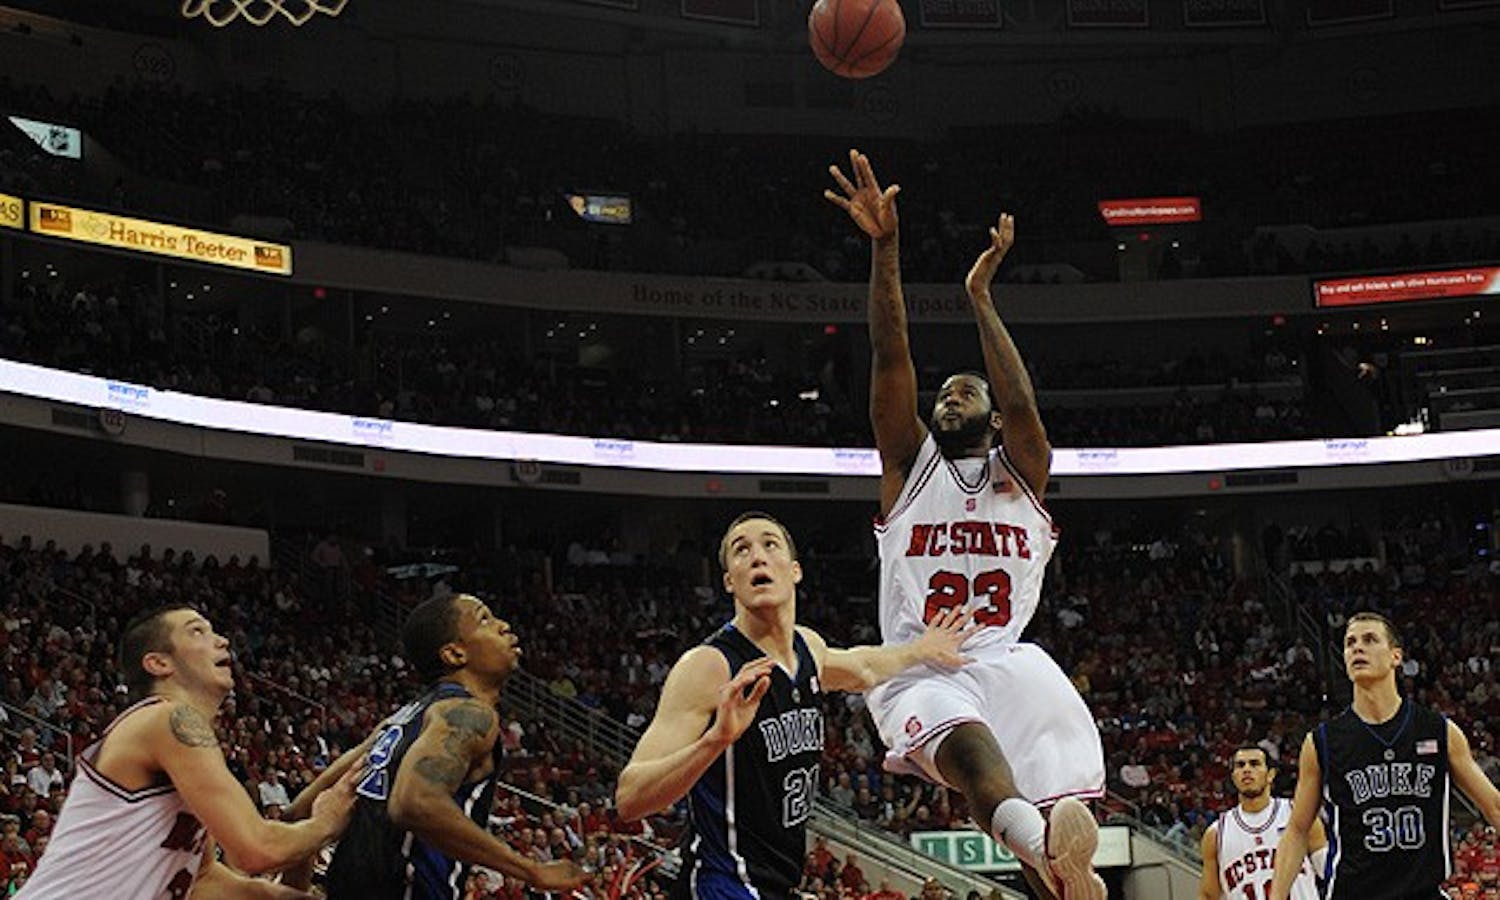 During the last time Duke set foot in Raleigh, Tracy Smith exploded for 23 points in the Wolfpack’s win.